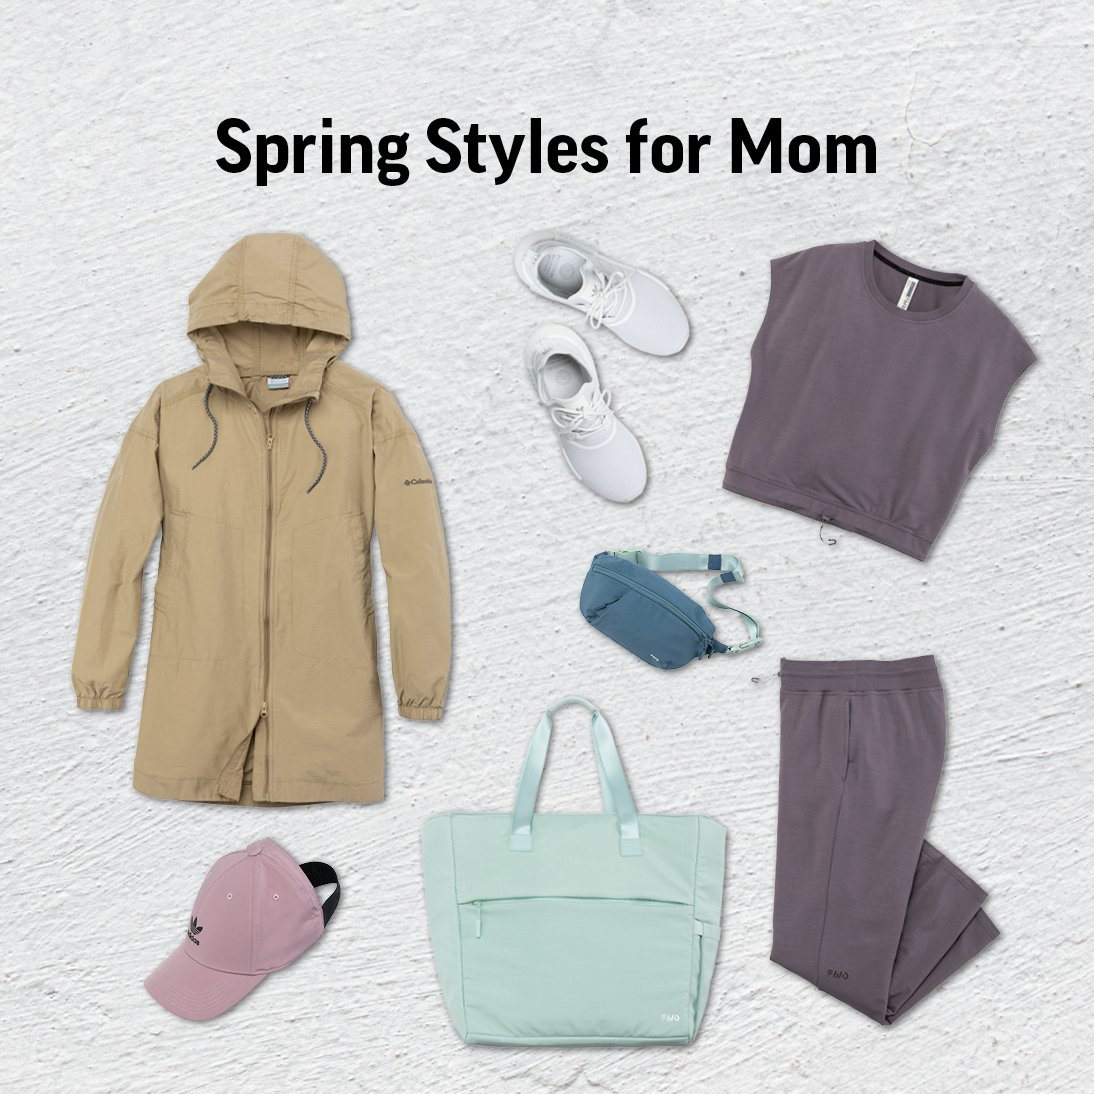 SPRING STYLES FOR MOM